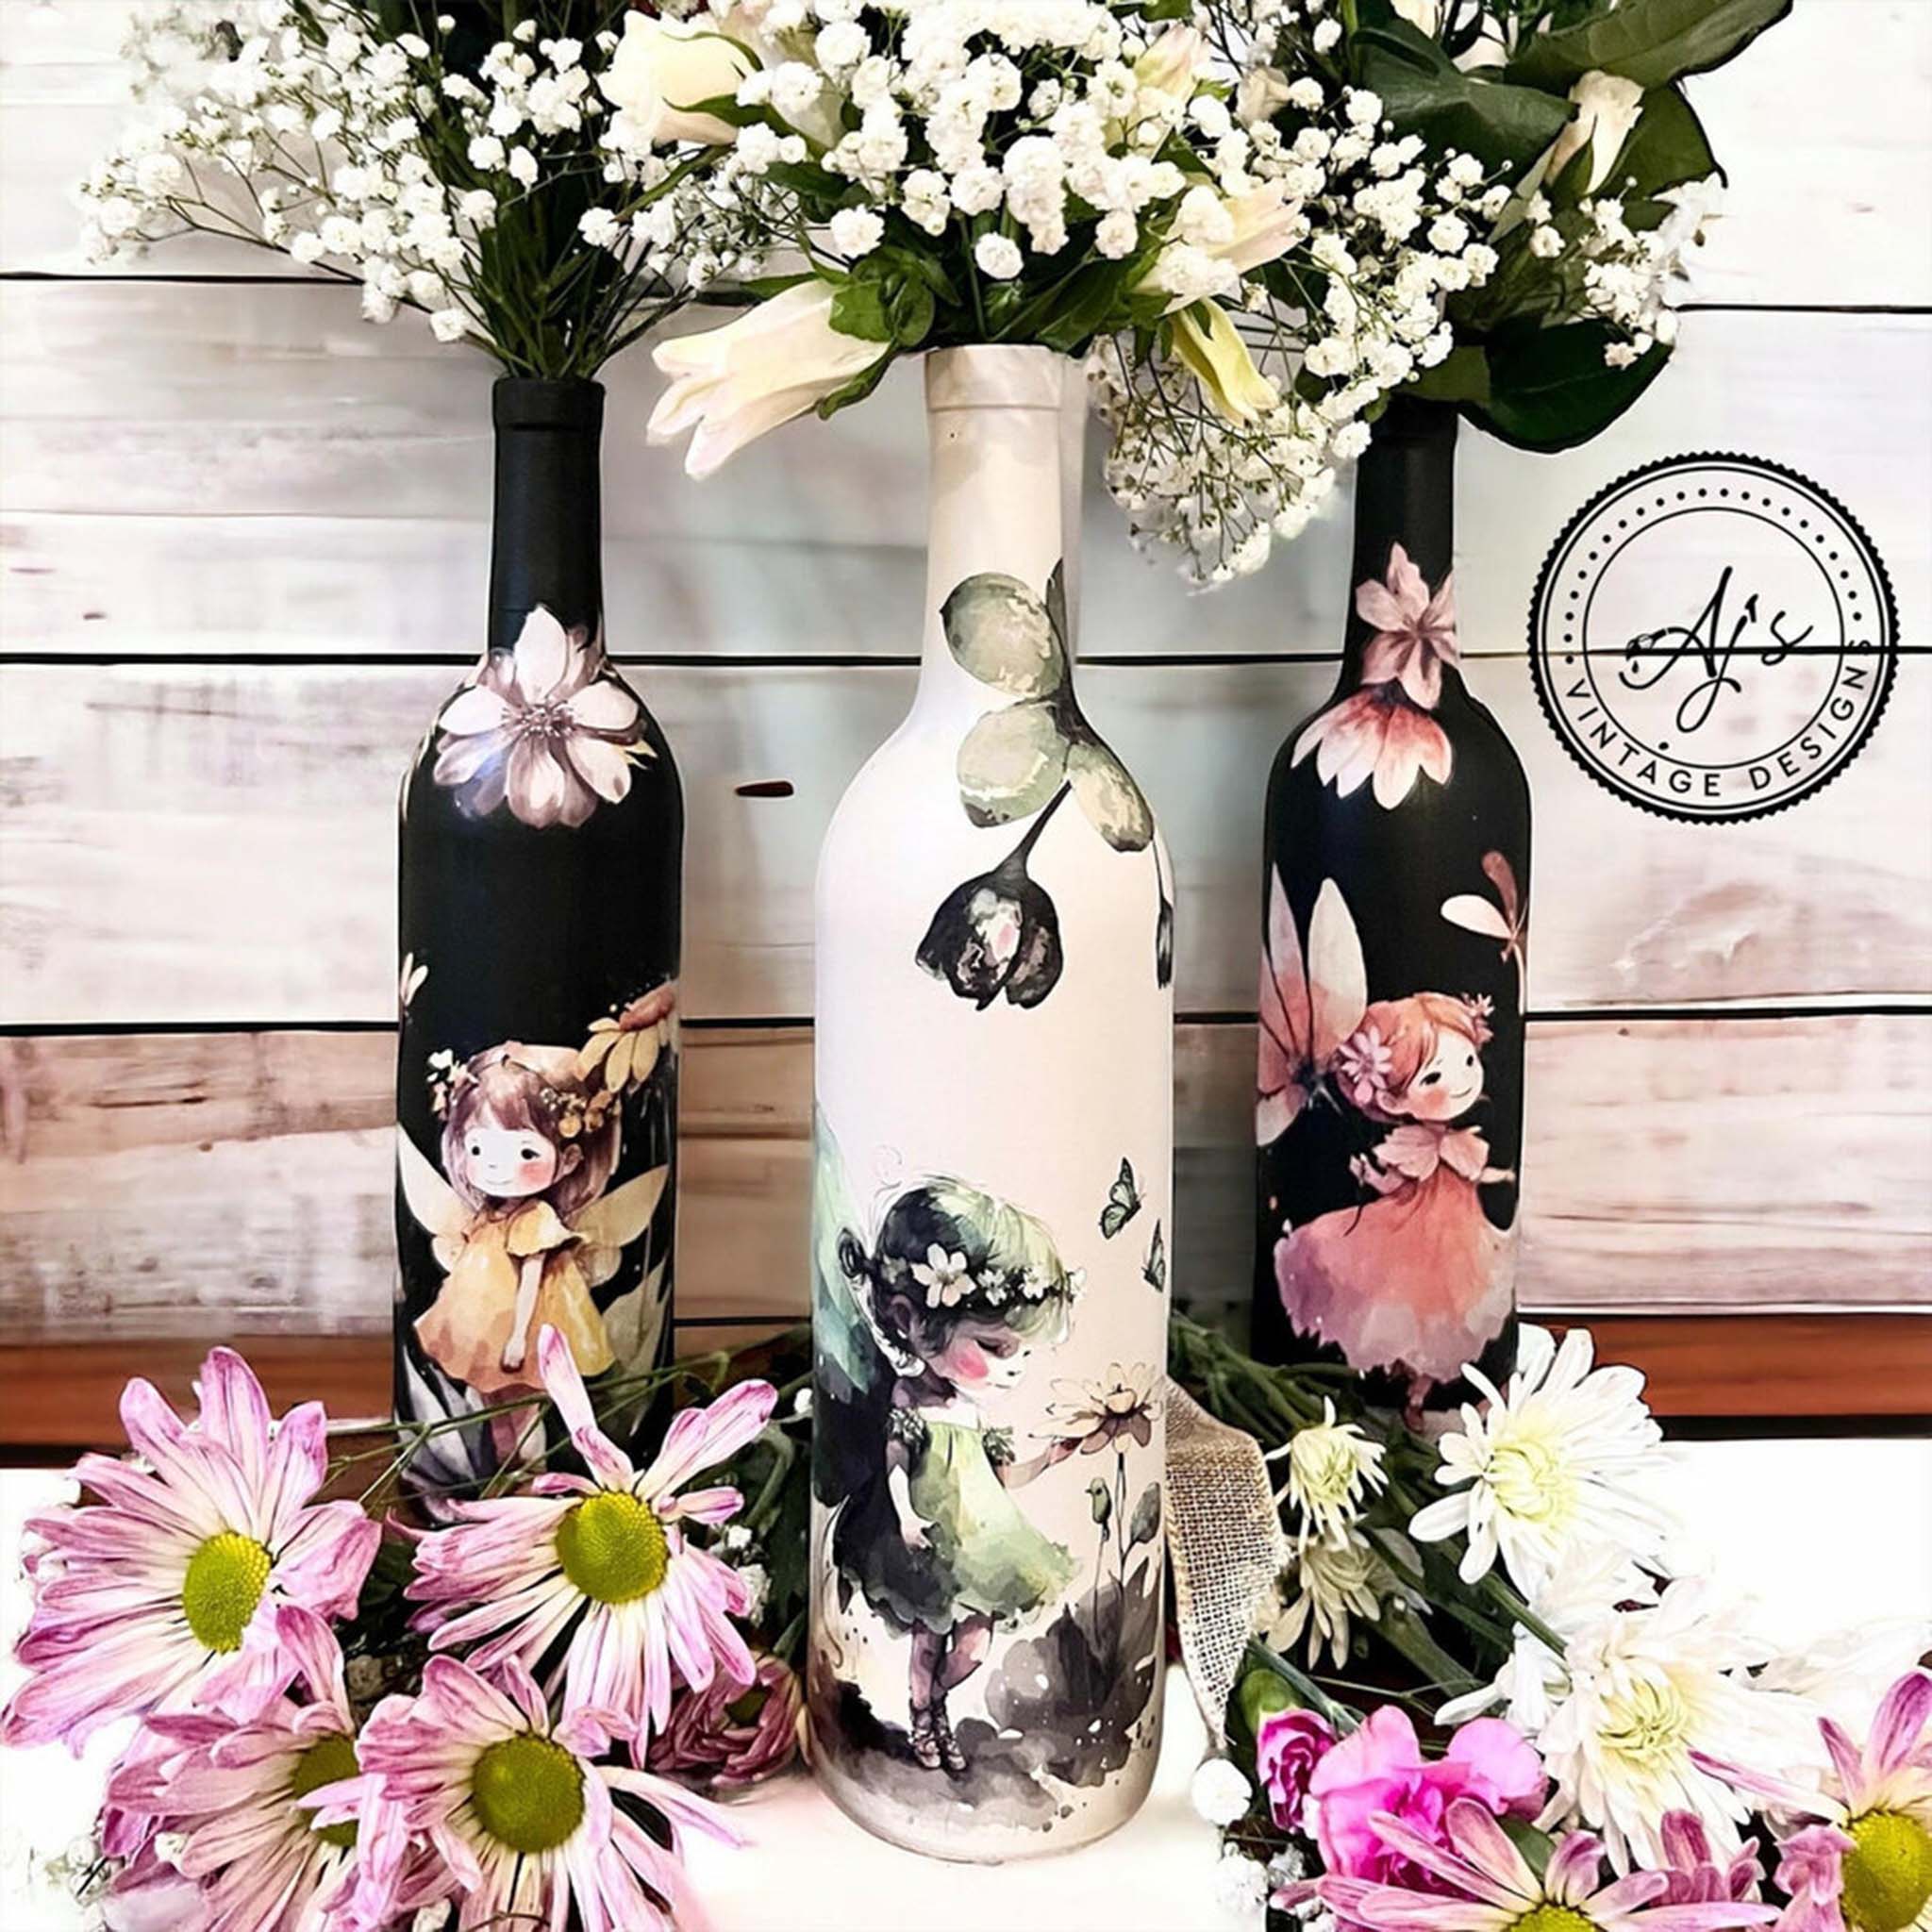 Three wine bottles refurbished by Aj's Vintage Designs feature Belles & Whistles' Fairyland small transfers on them. Two bottles are painted black and one is white.